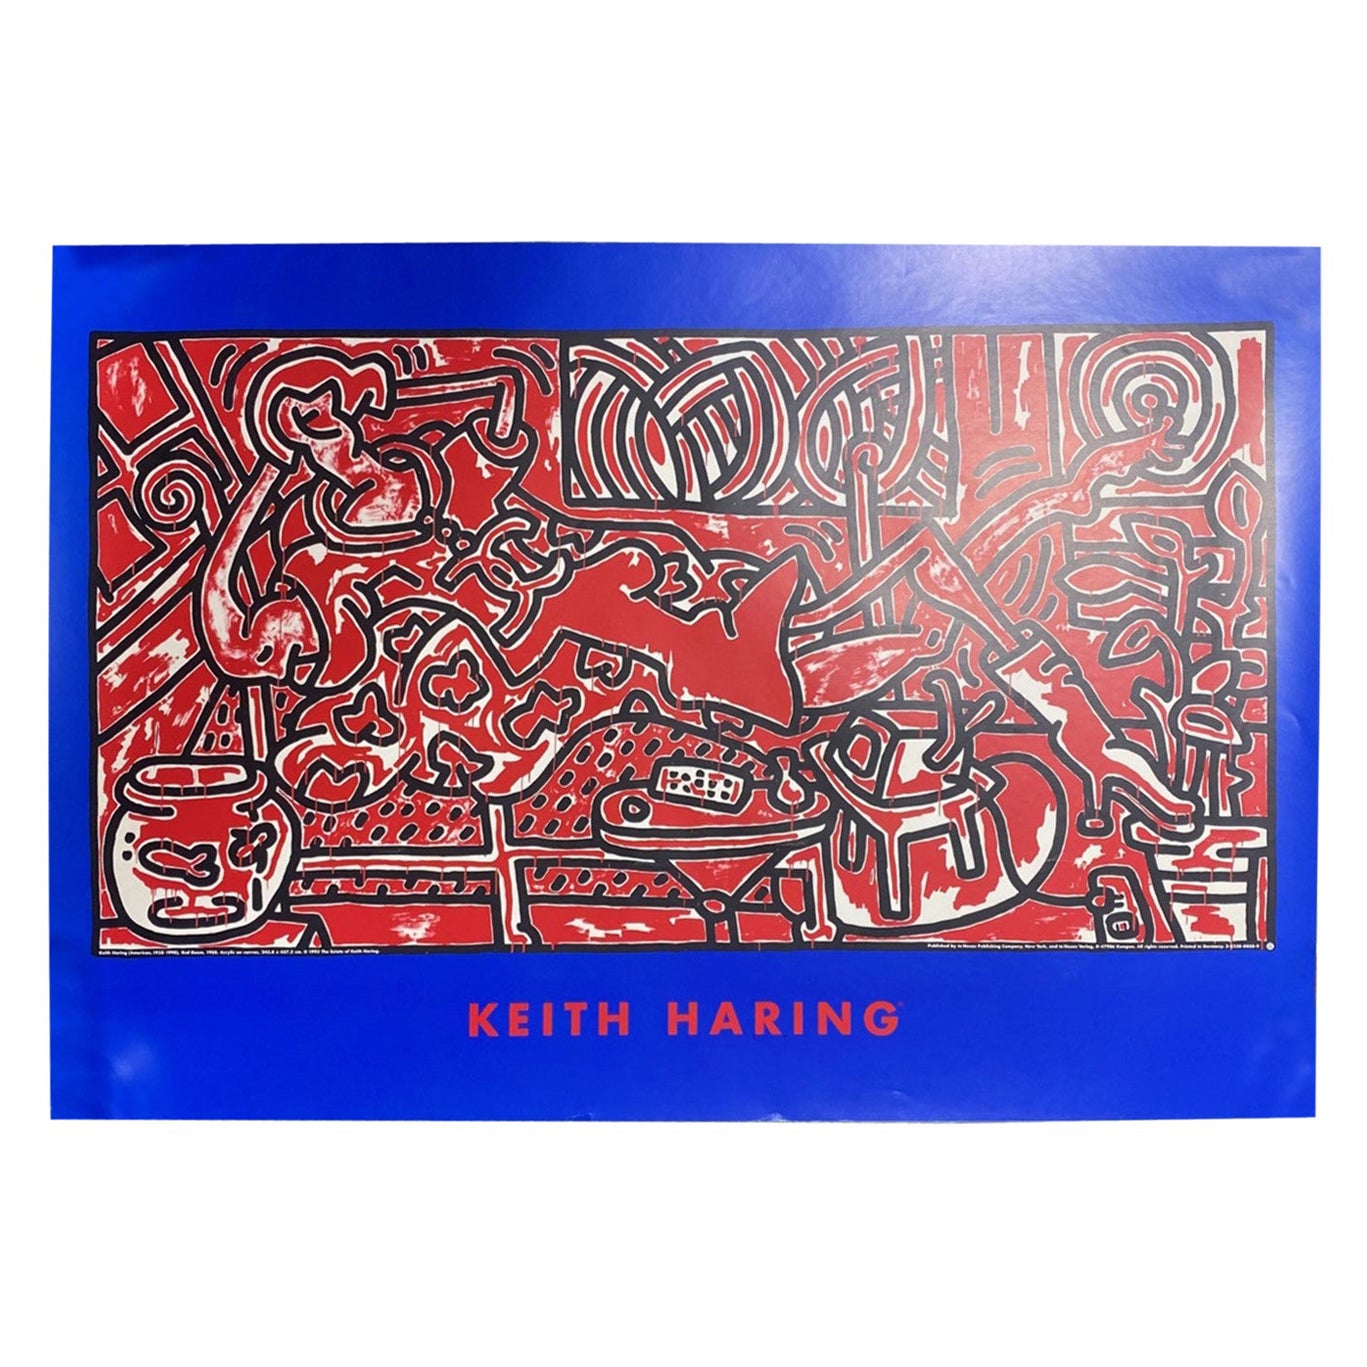 Keith Haring Vintage NYC Pop Shop te Neues Art Lithograph Poster Red Room, 1993 For Sale